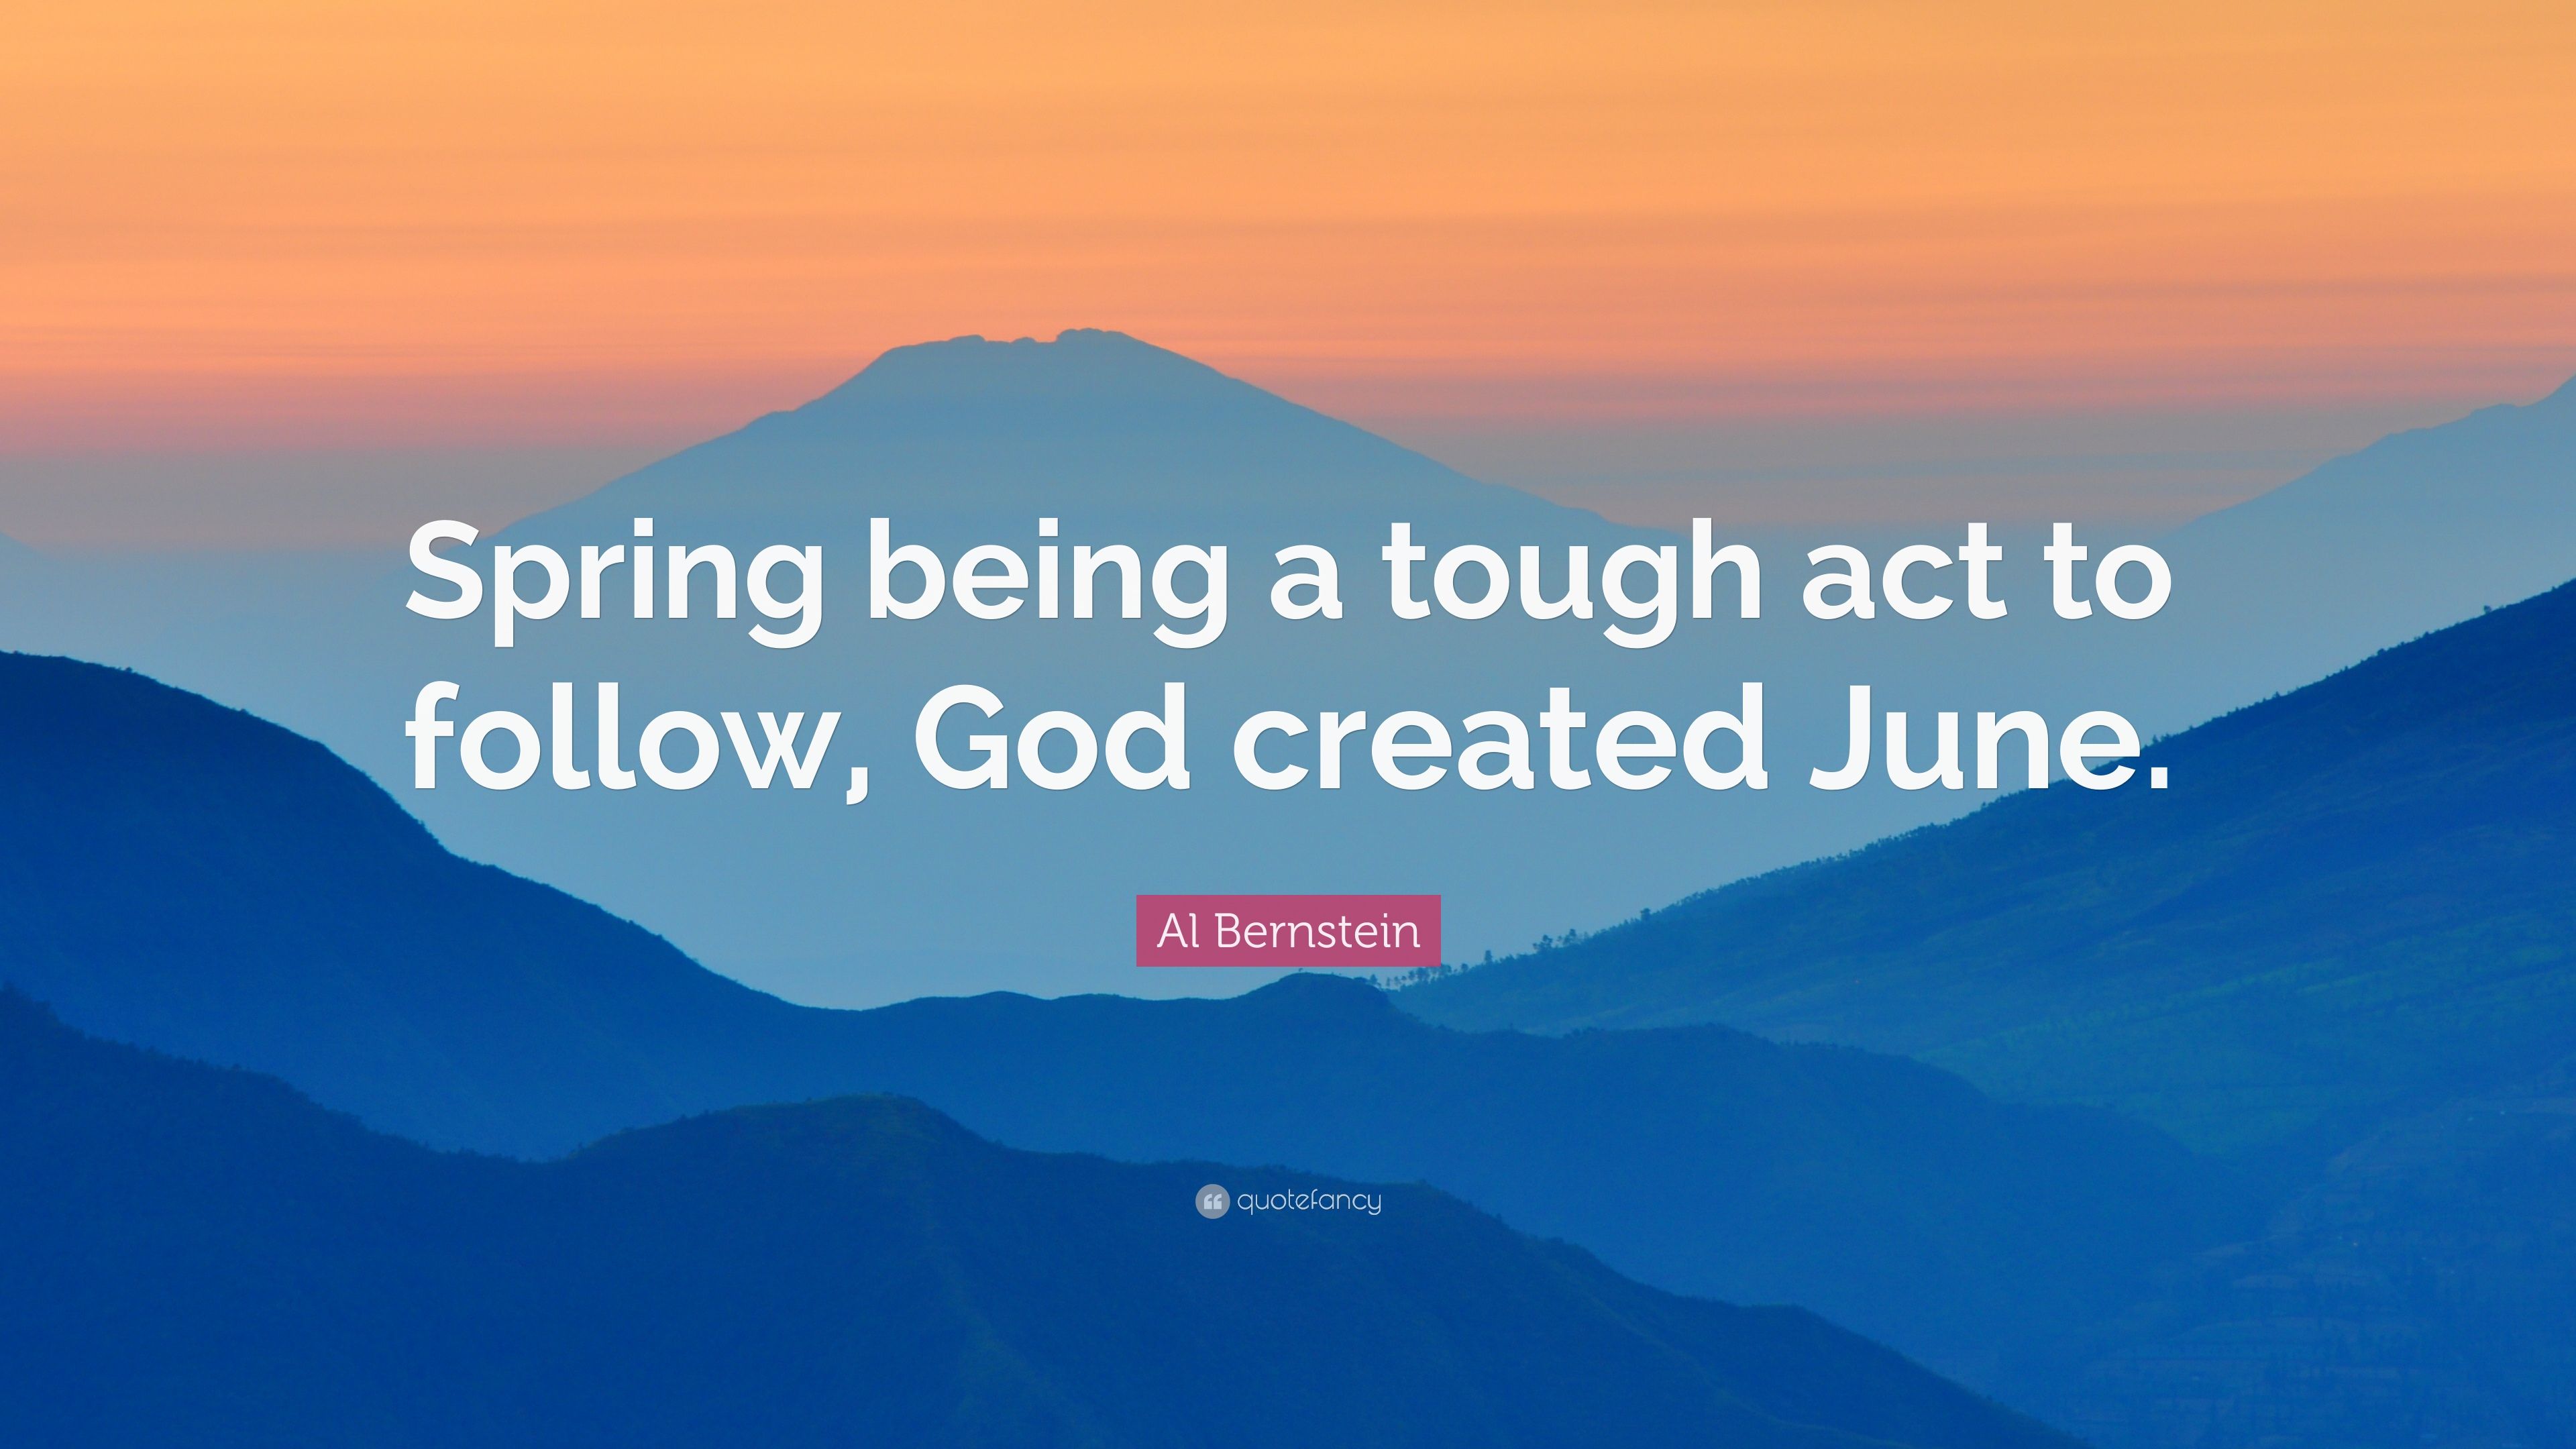 Al Bernstein Quote: “Spring being a tough act to follow, God